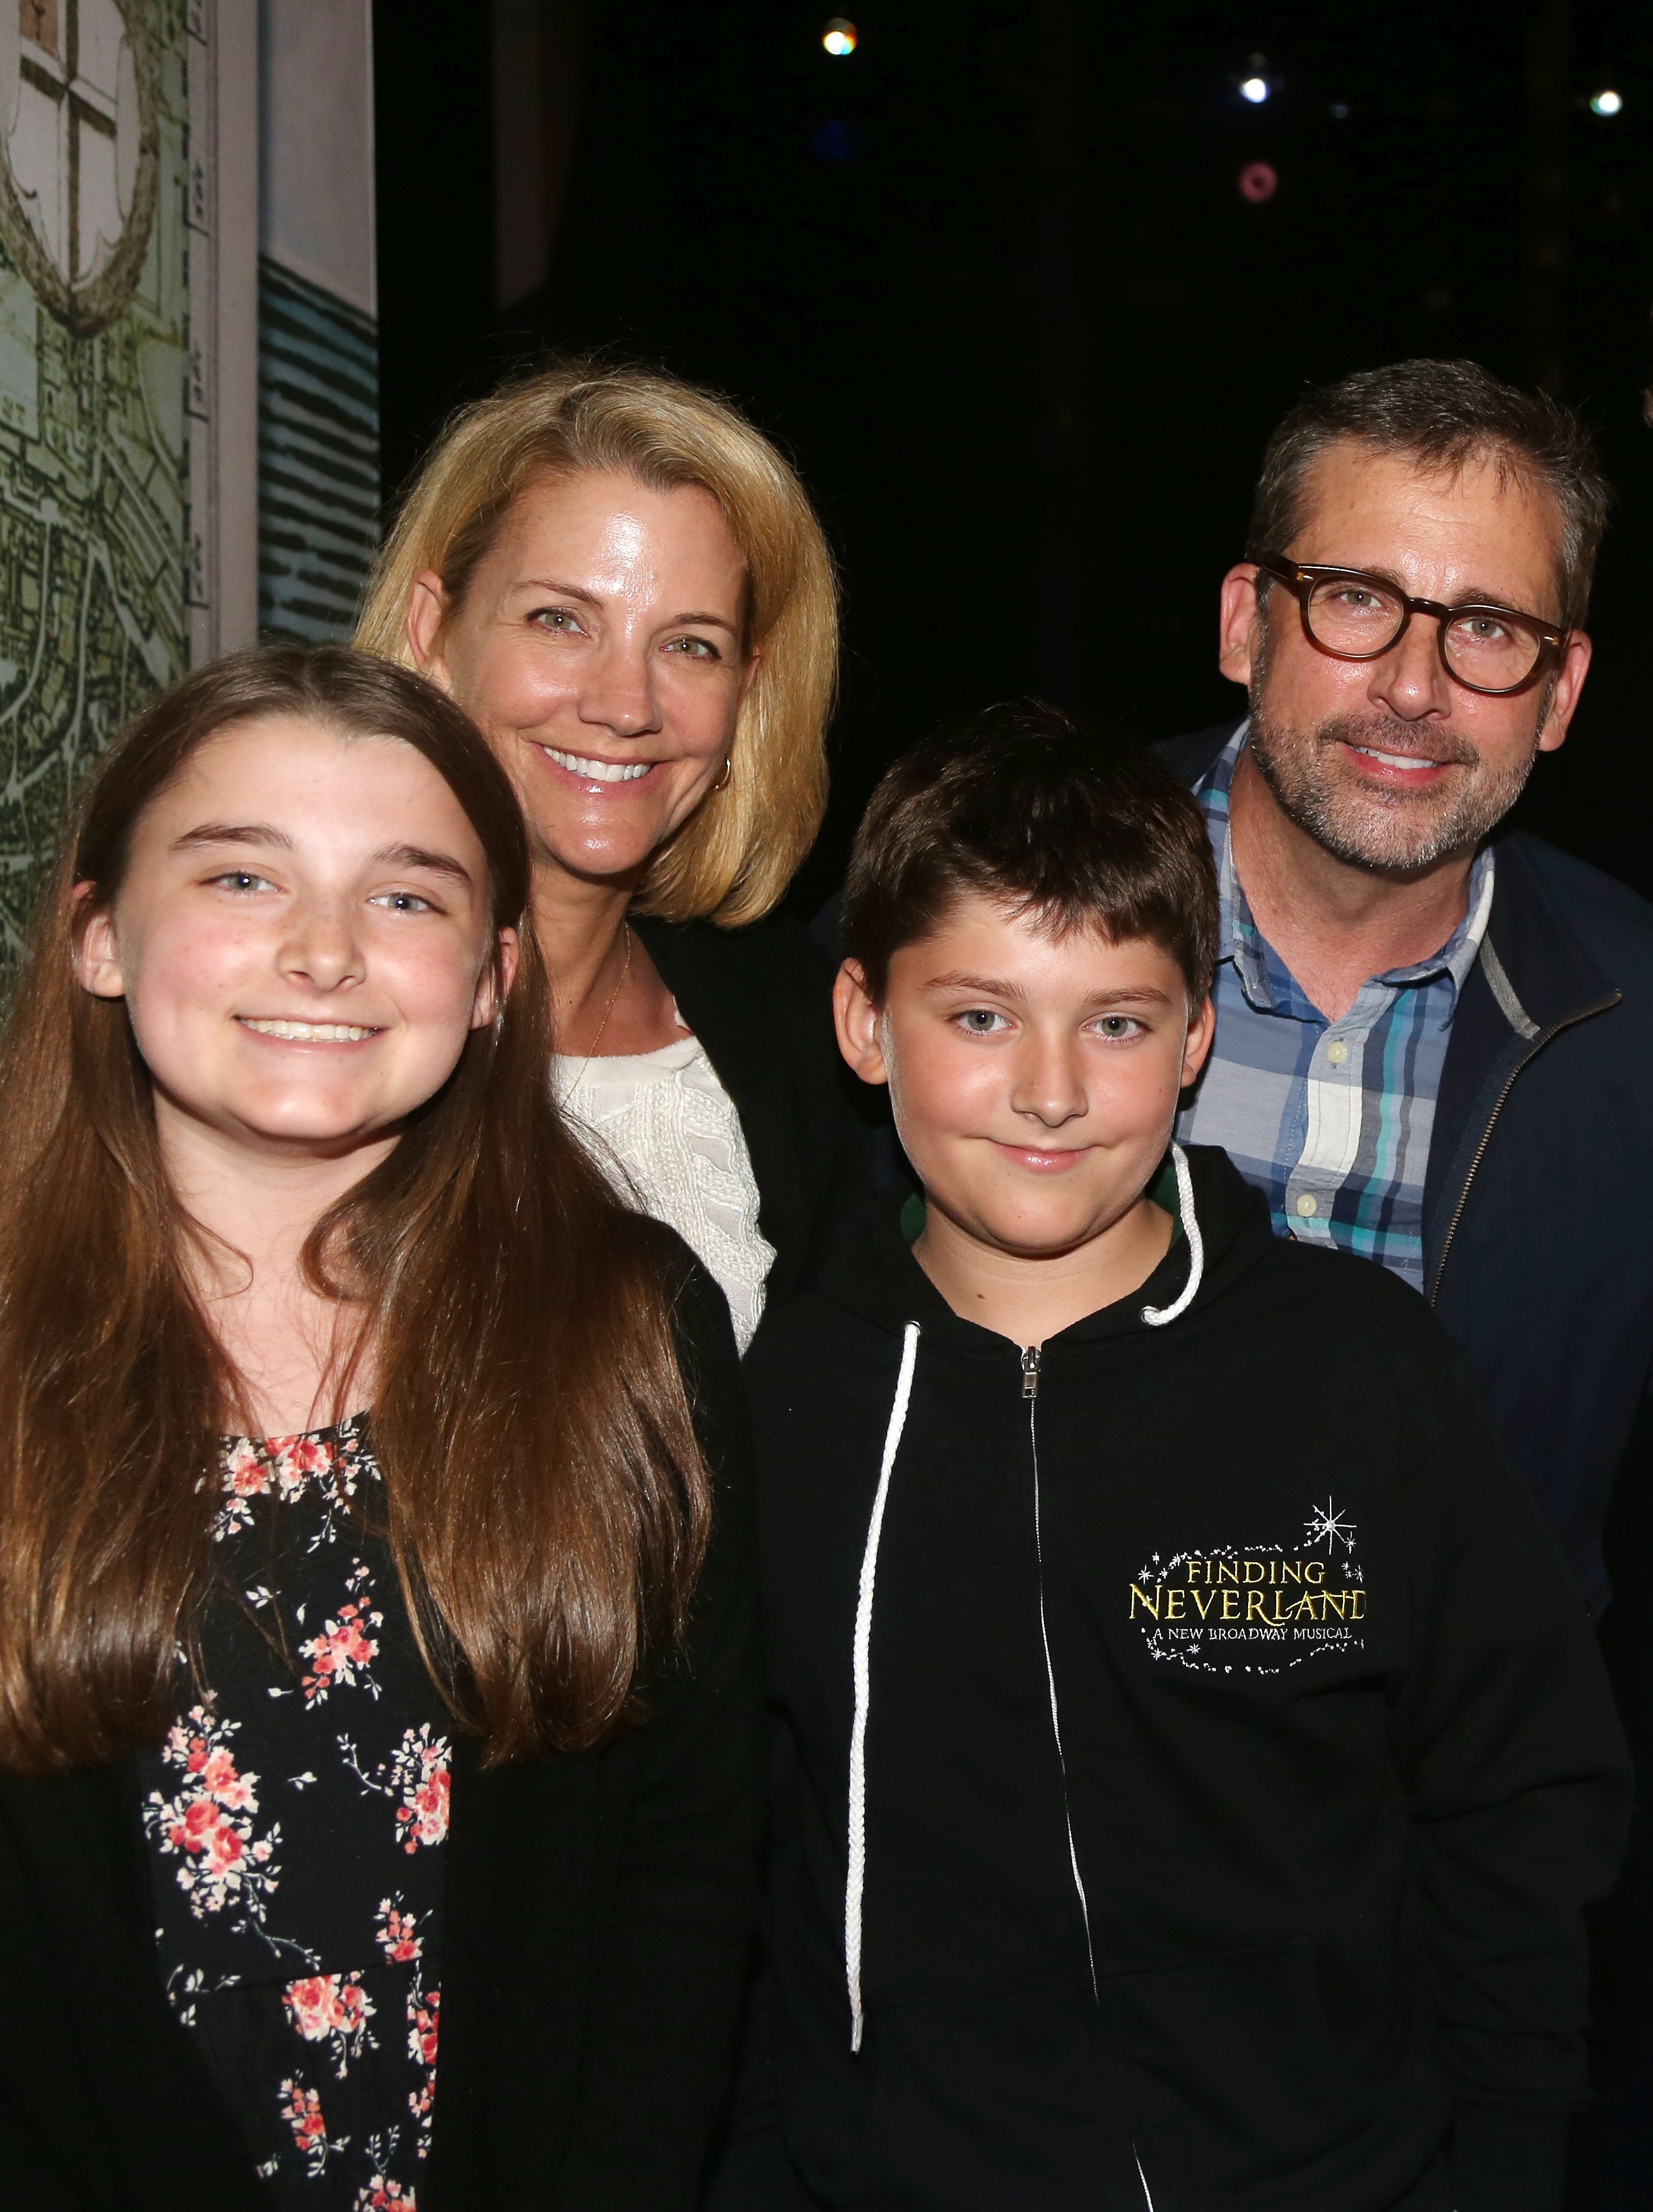   Elisabeth Anne Carell, Nancy Carell, John Carell and Steve Carell backstage at the hit musical "Finding Neverland" on Broadway on June 23, 2015 in New York | Source: Getty Images